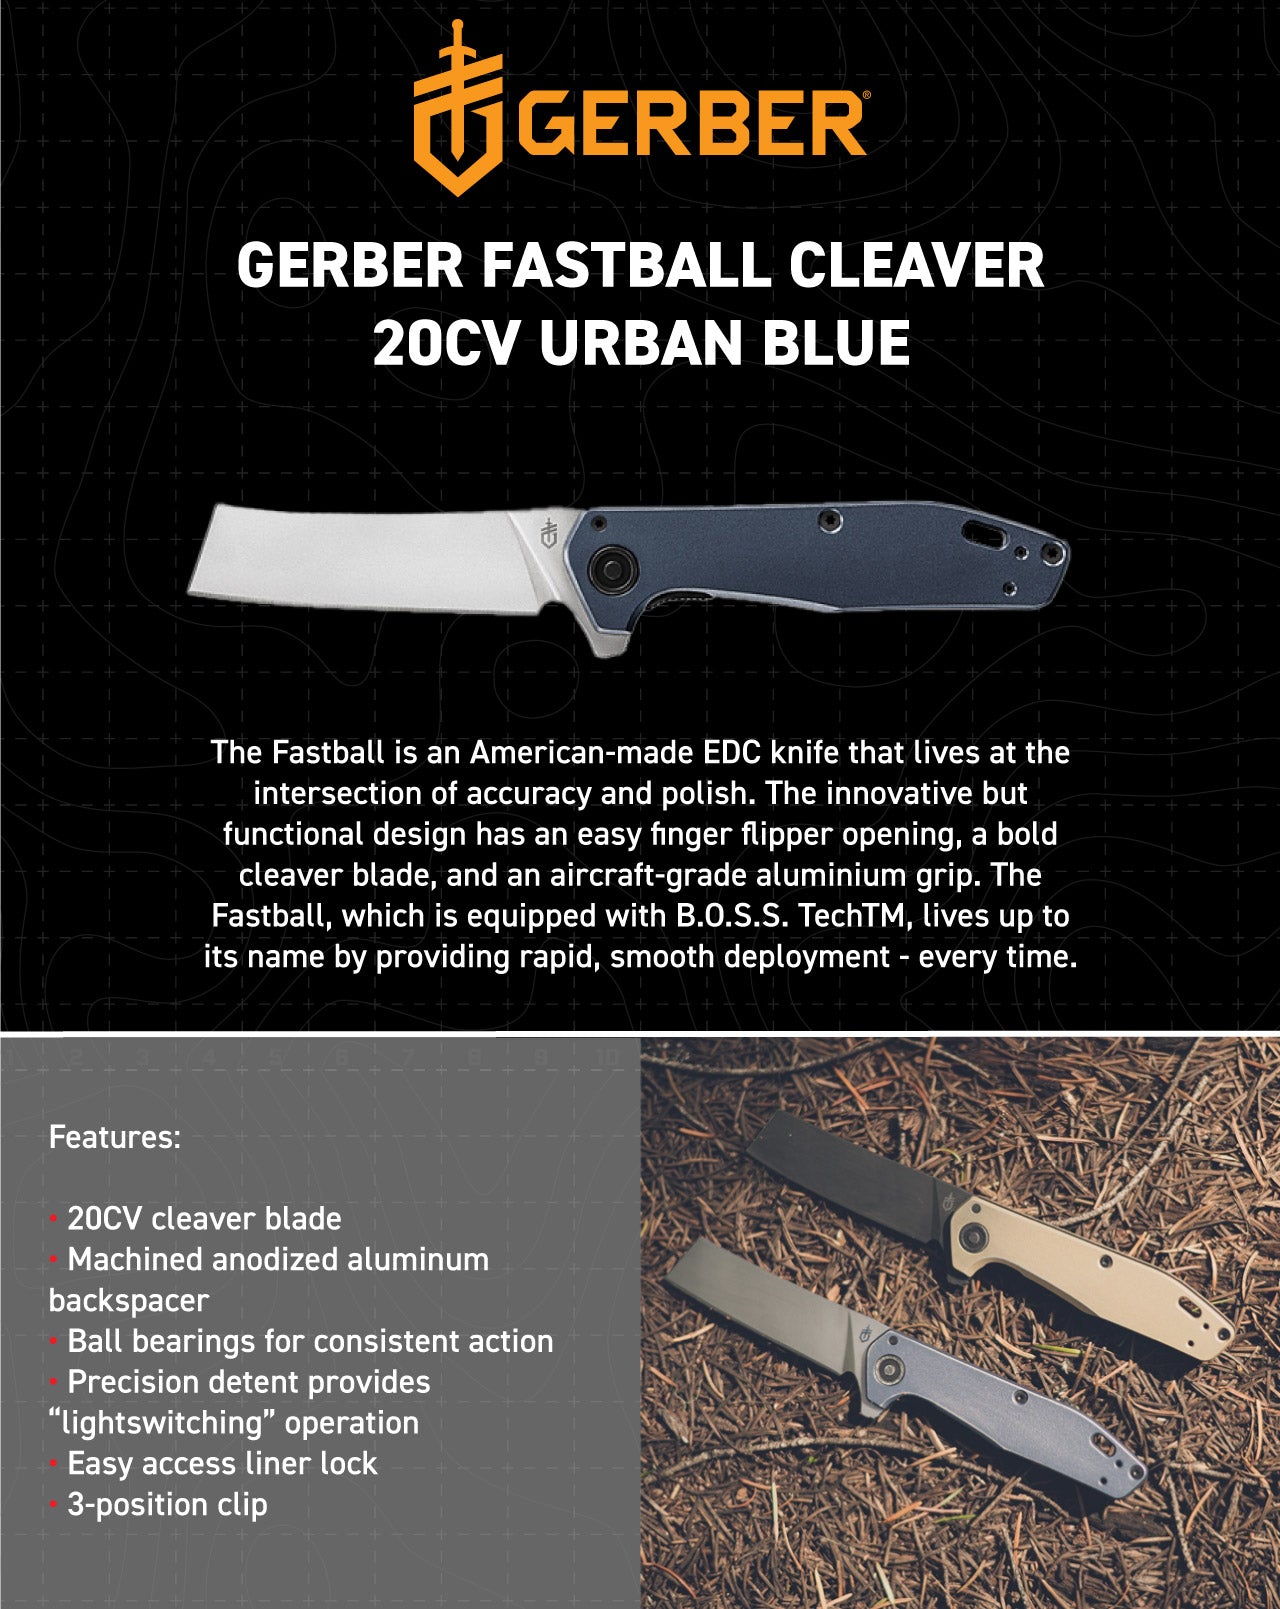 The Fastball is an American-made EDC knife that lives at the intersection of accuracy and polish. The innovative but functional design has an easy finger flipper opening, a bold cleaver blade, and an aircraft-grade aluminium grip. The Fastball, which is equipped with B.O.S.S. TechTM, lives up to its name by providing rapid, smooth deployment - every time.